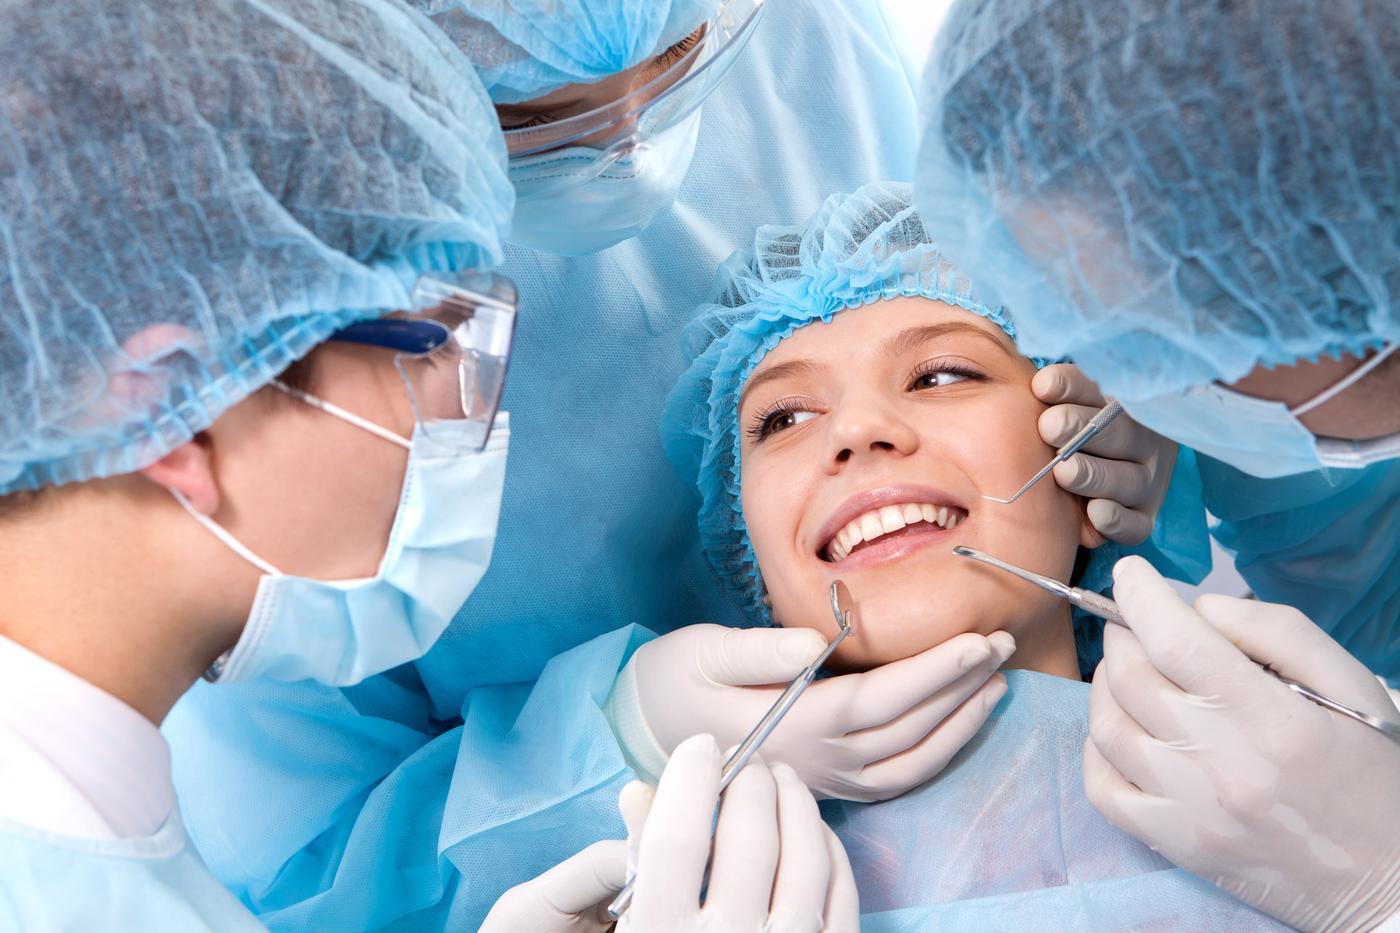 Oral Surgery in London, Ontario - Everything You Wish to Know